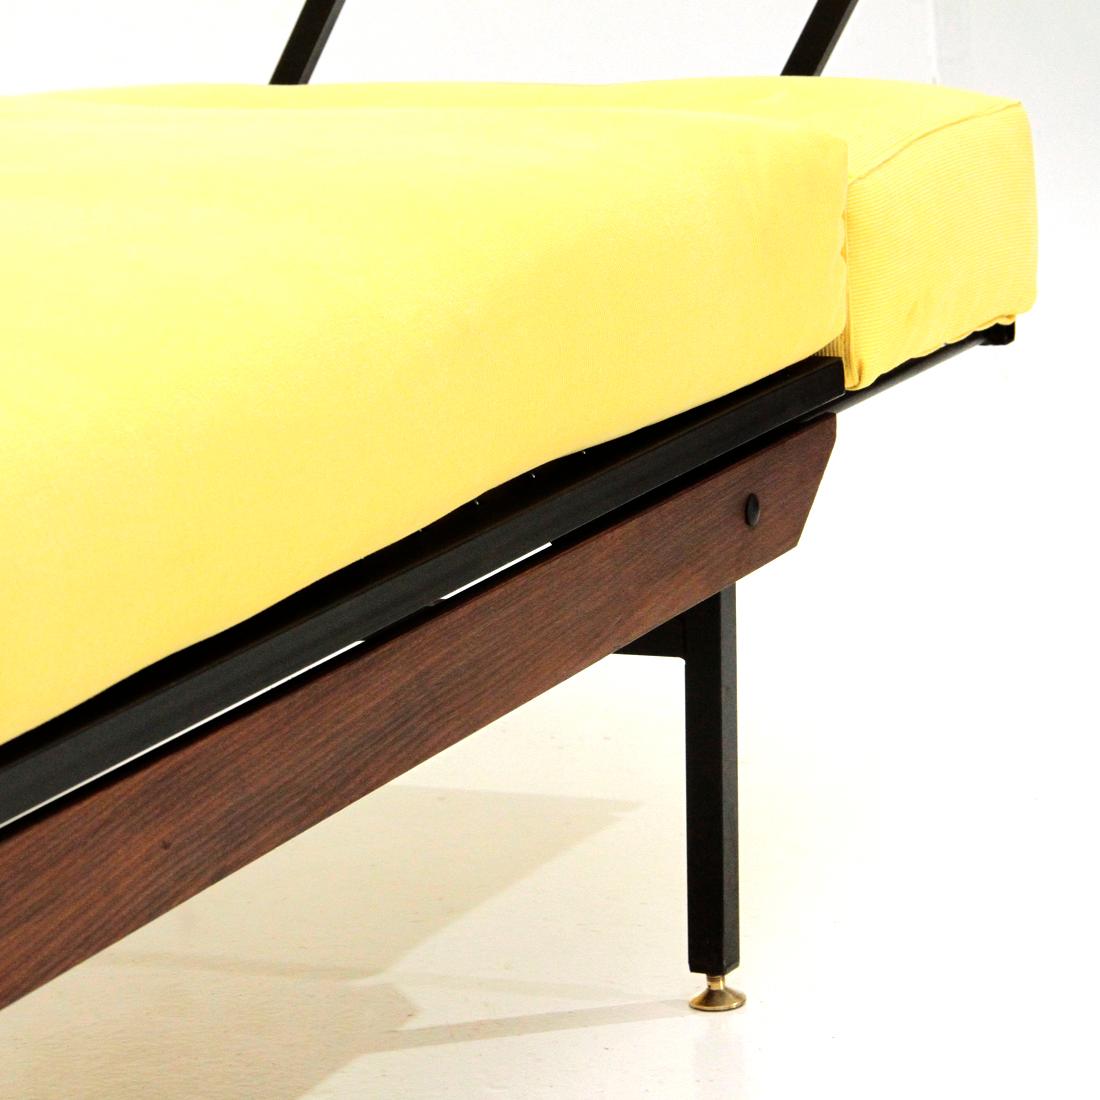 Italian Midcentury Sofa Bed in Yellow Fabric, 1950s For Sale 1